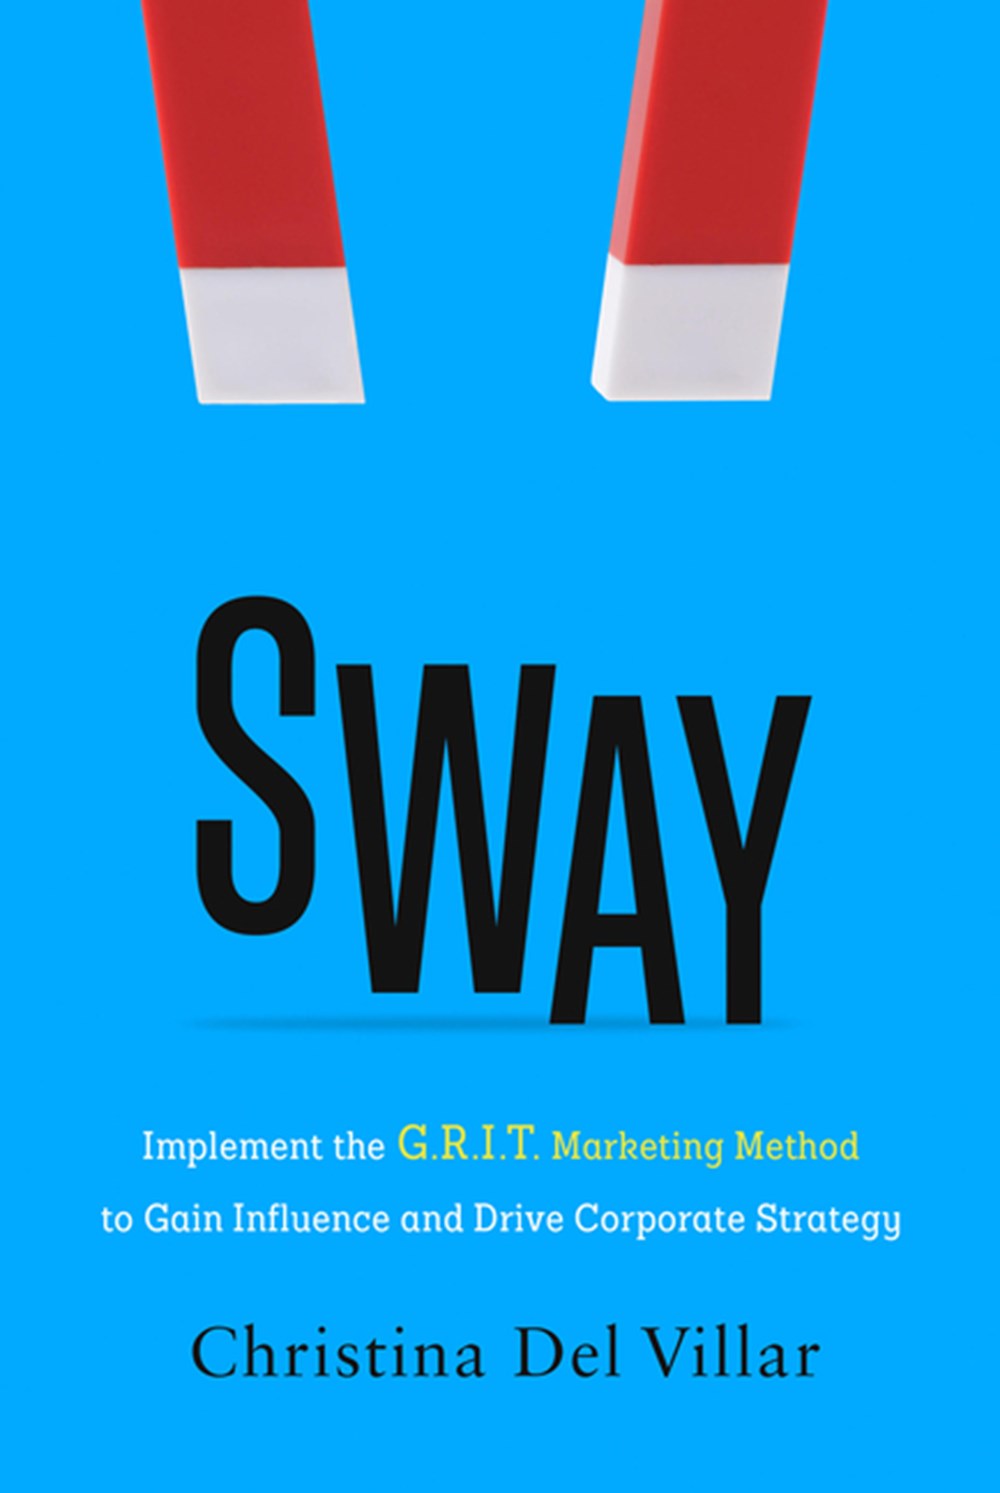 Sway Implement the G.R.I.T. Marketing Method to Gain Influence and Drive Corporate Strategy